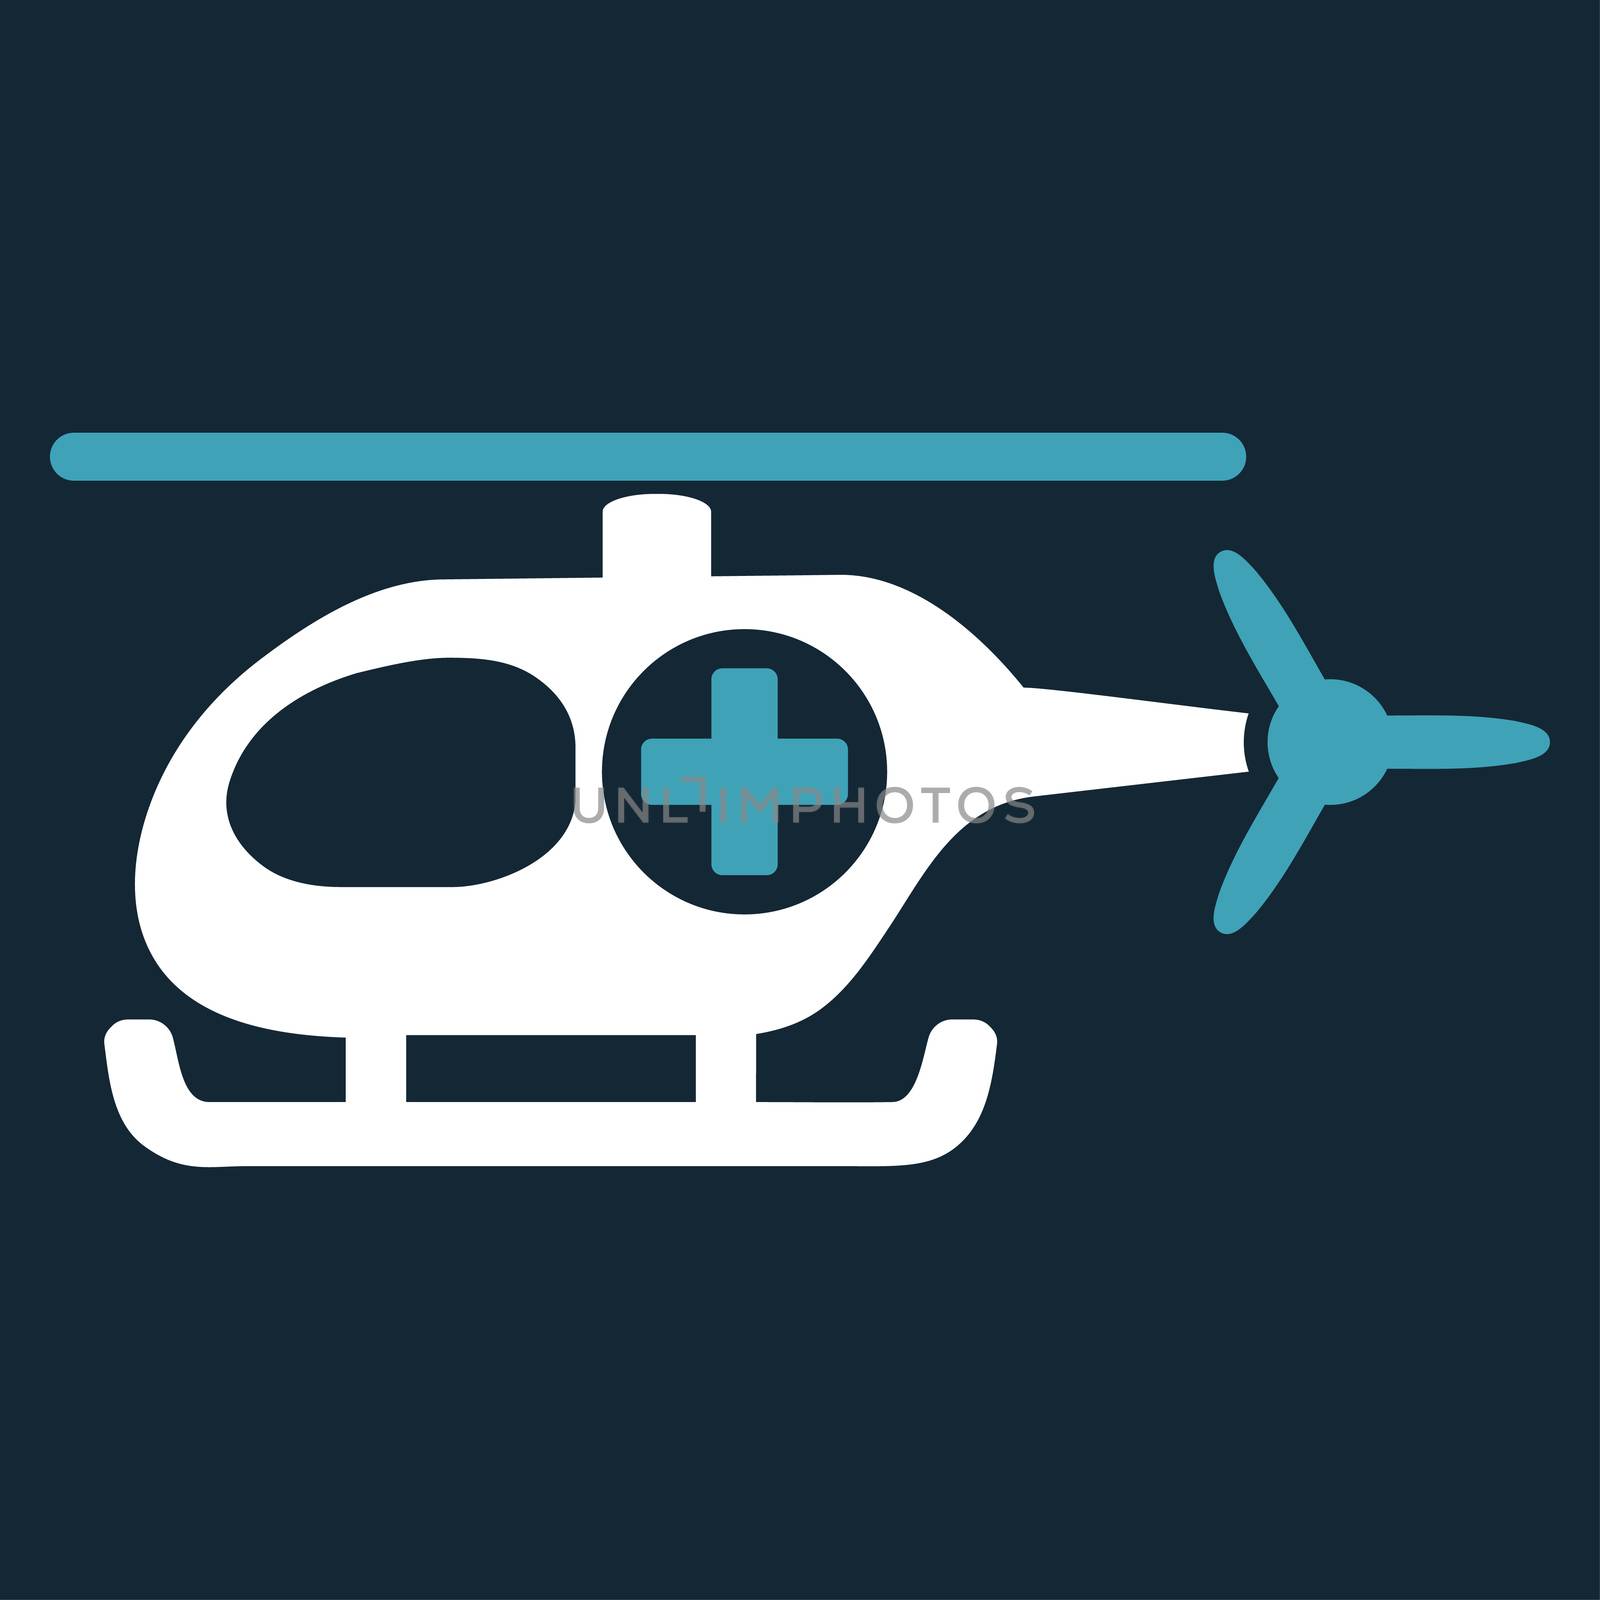 Medical Helicopter raster icon. Style is bicolor flat symbol, blue and white colors, rounded angles, dark blue background.